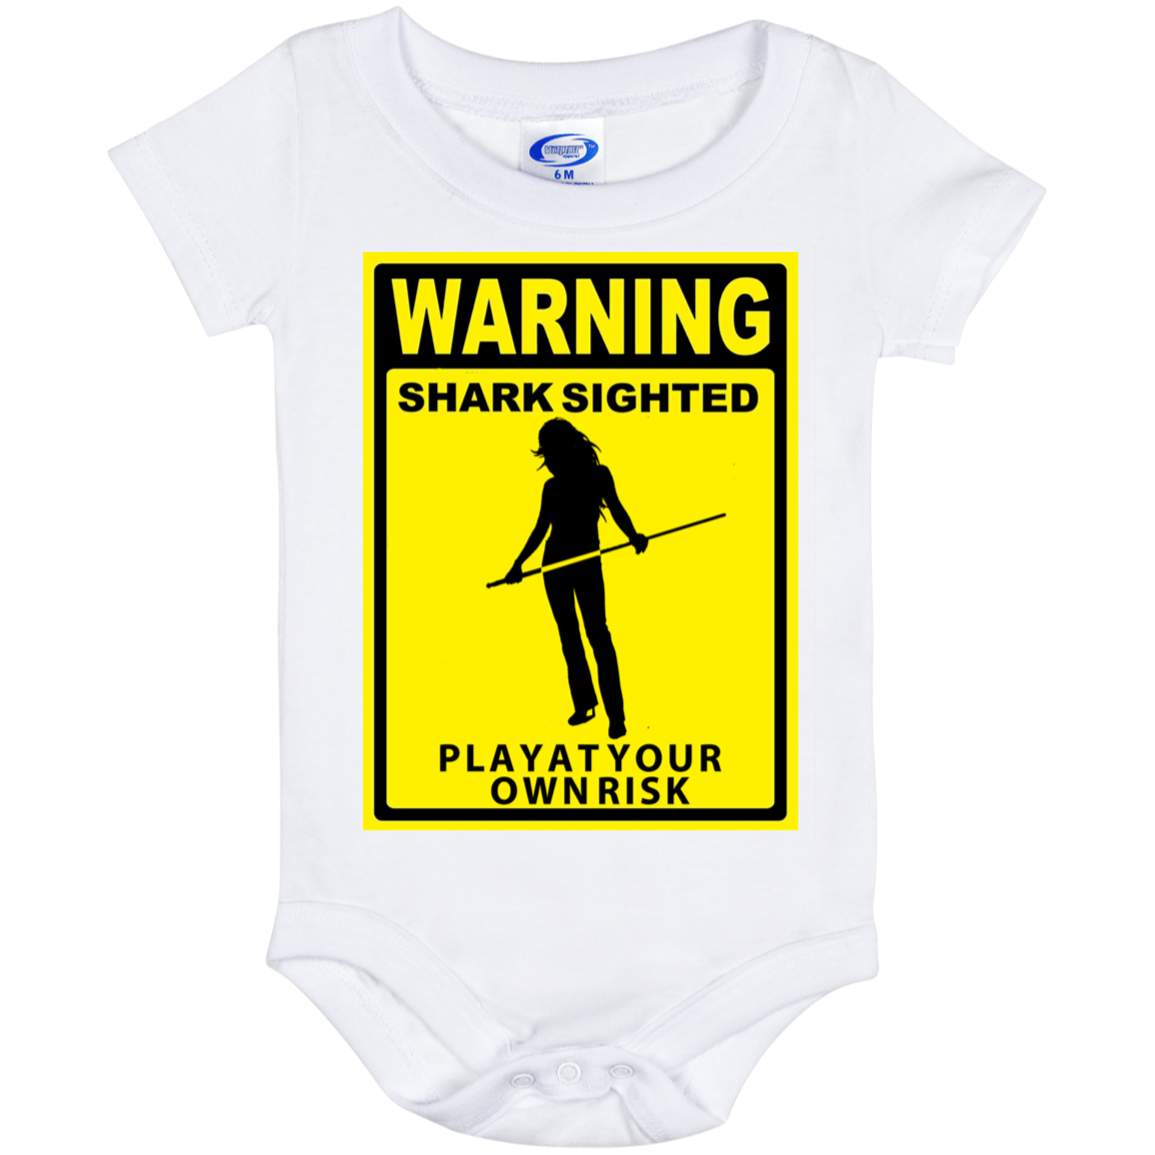 The GHOATS Custom Design. #34 Beware of Sharks. Play at Your Own Risk. (Ladies only version). Baby Onesie 6 Month